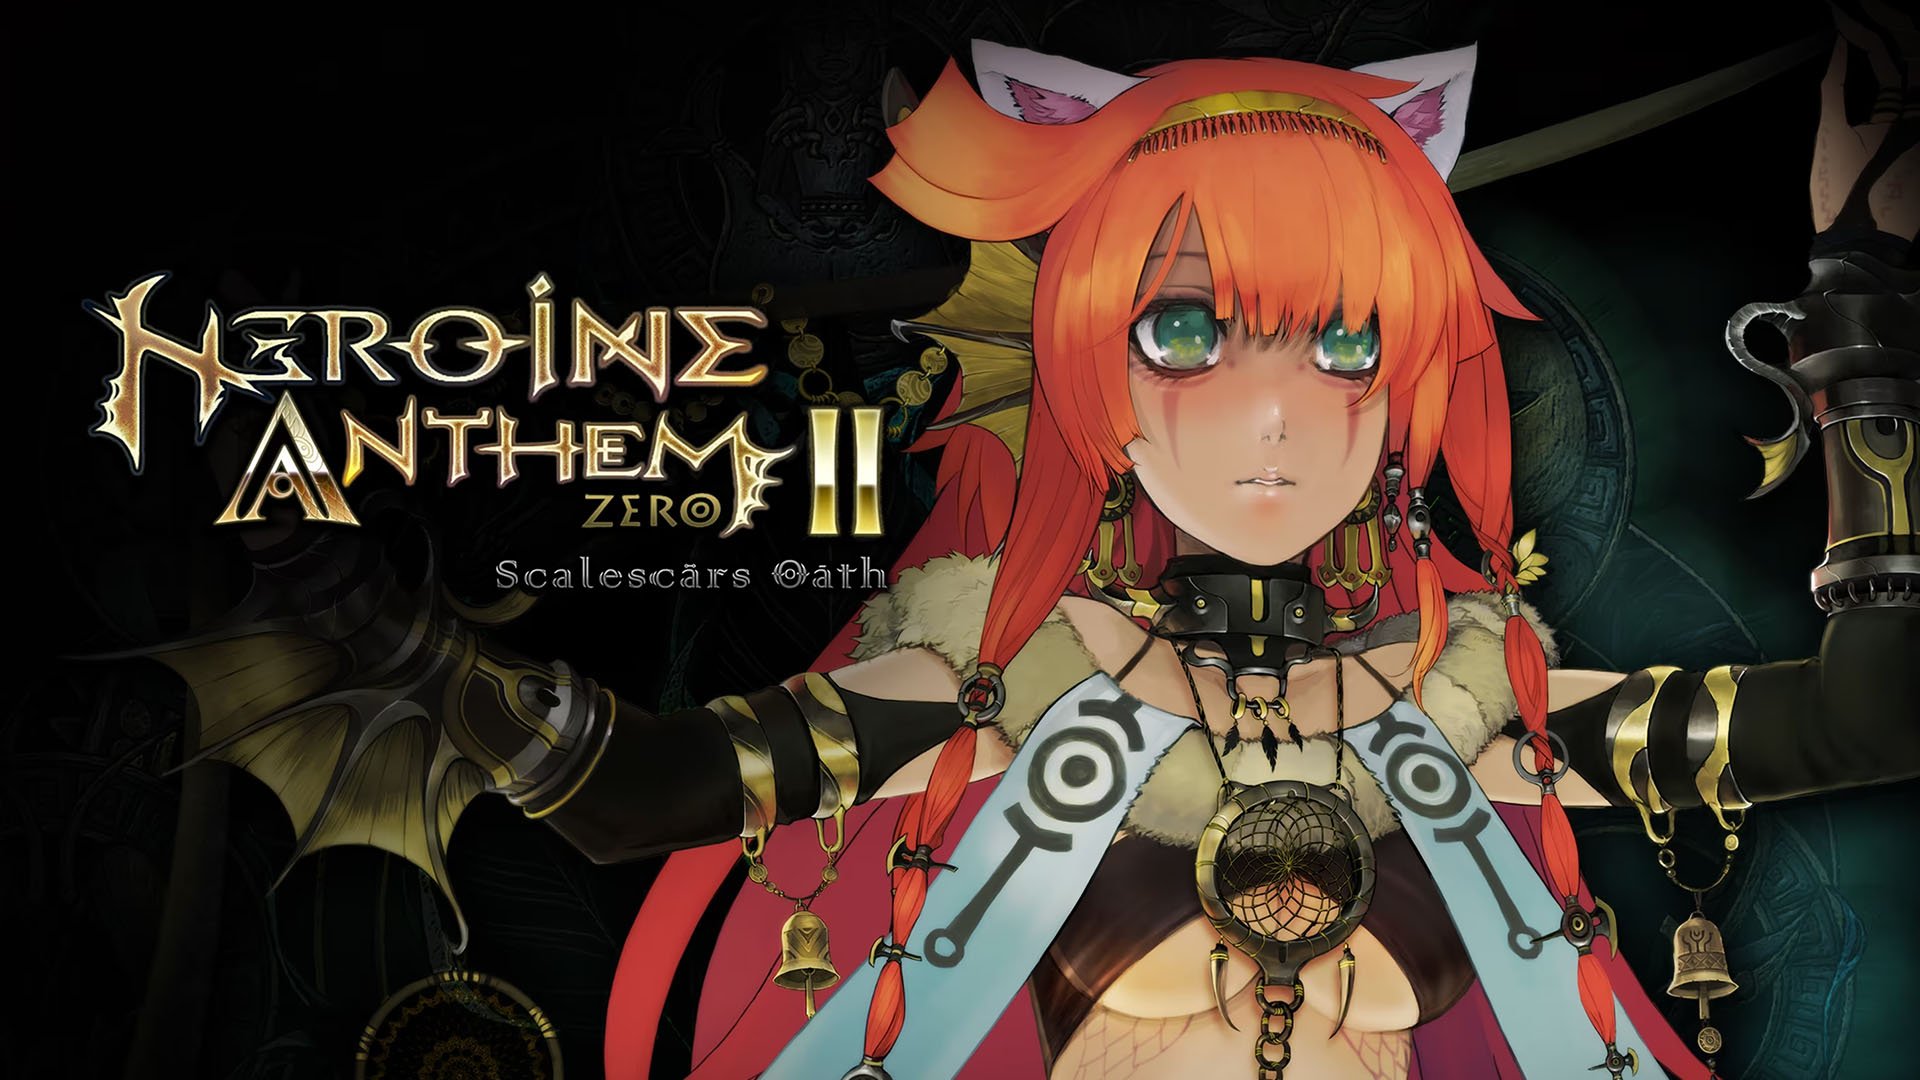 #
      Heroine Anthem ZERO II: Scalescars Oath now available for PS5